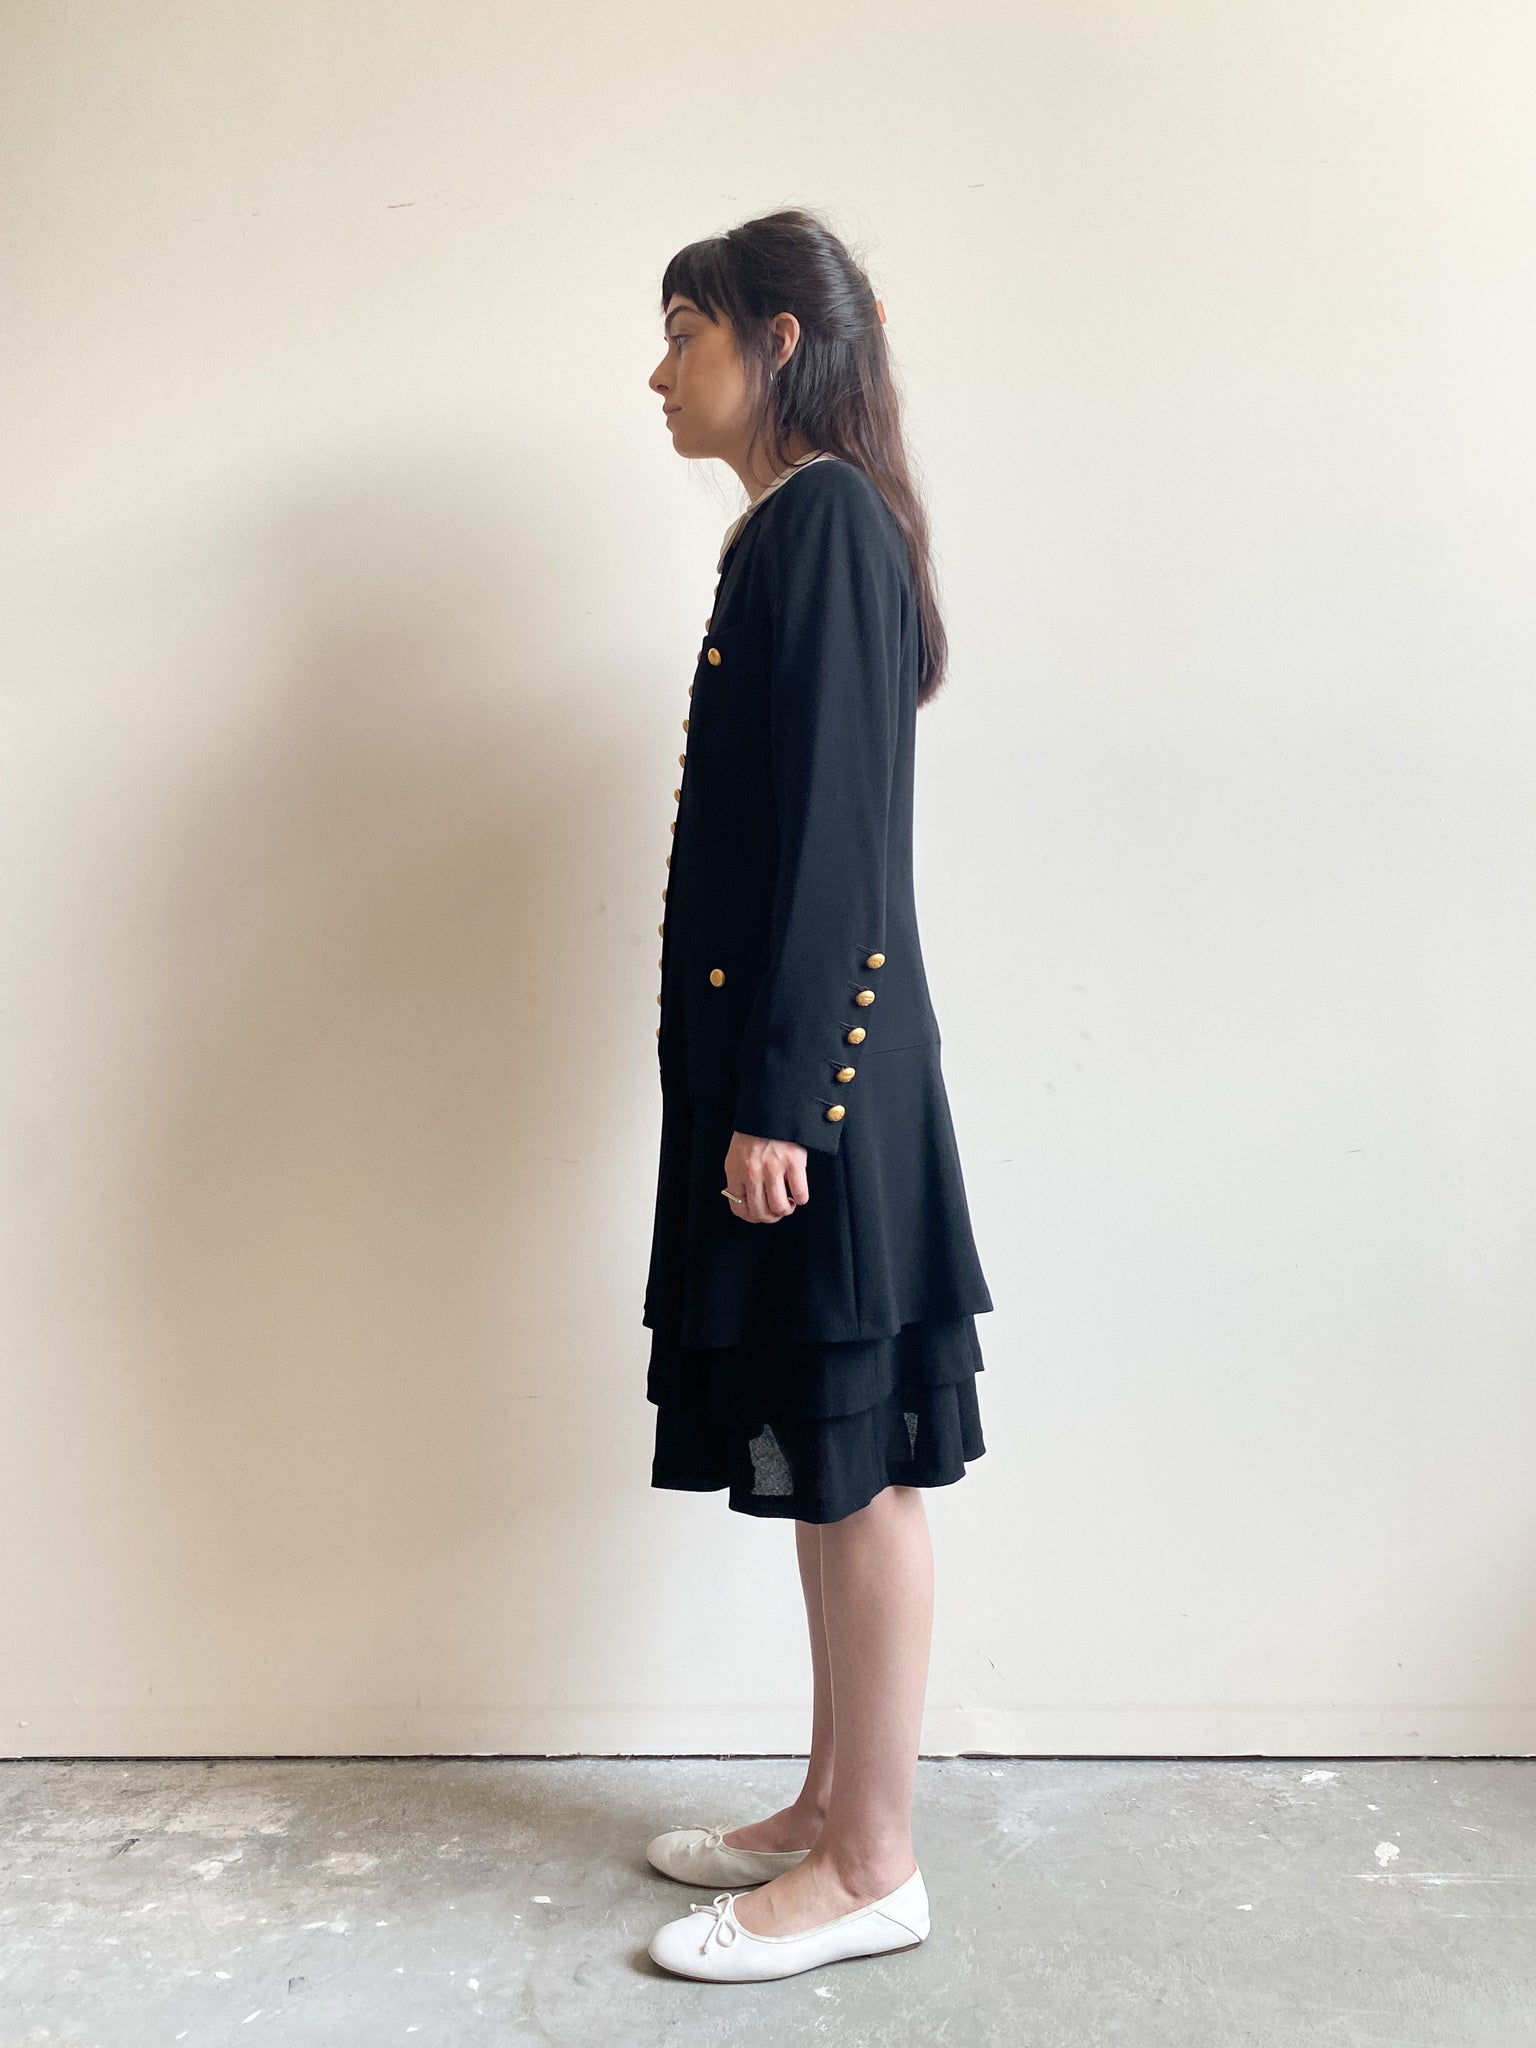 Vintage Rena Lange Wool & Silk Black Dress with White Collar and Gold Buttons (M)